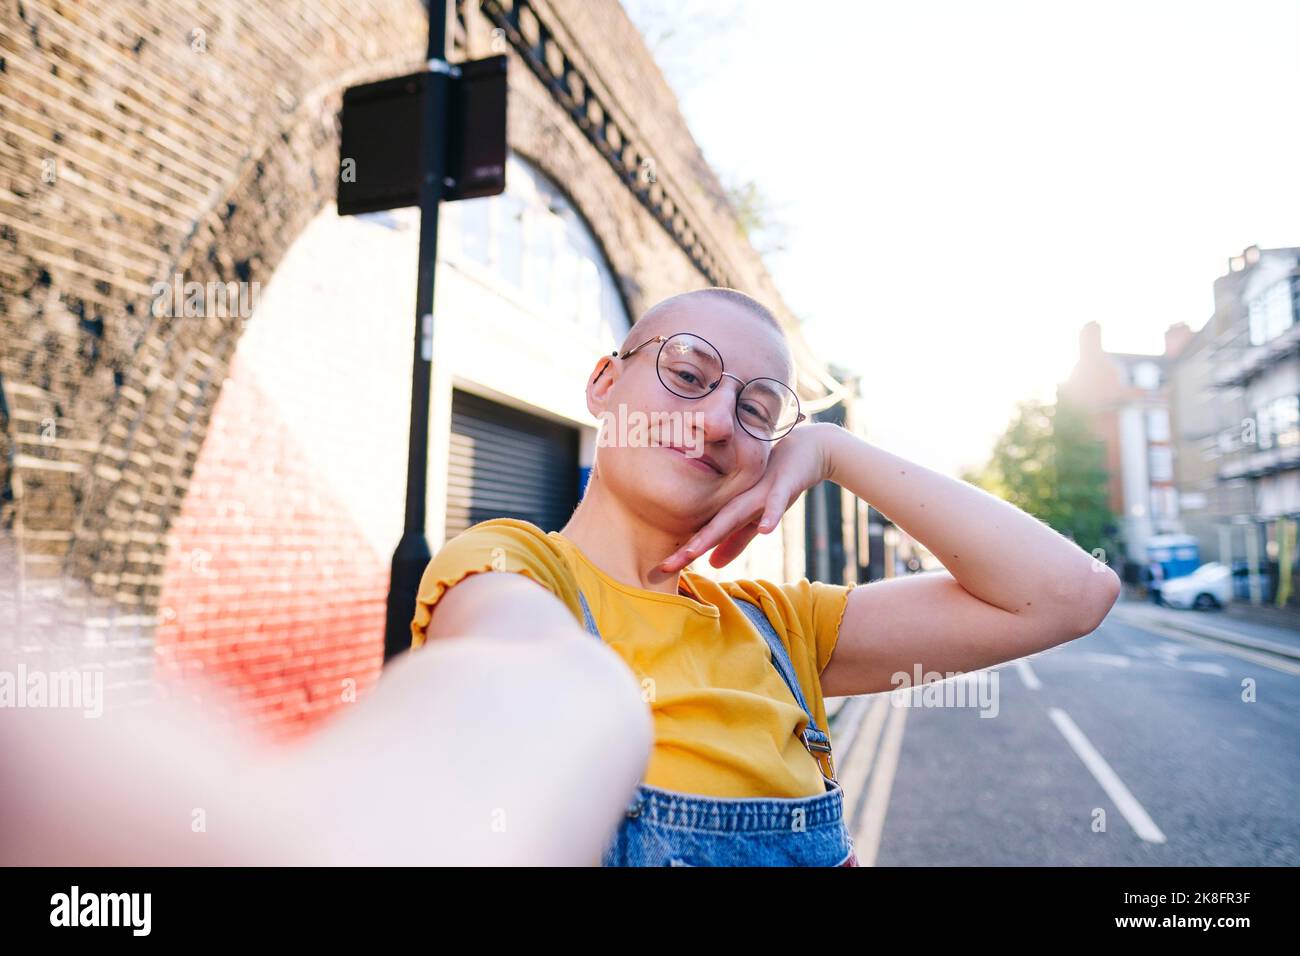 Smiling non-binary person with shaved head taking selfie on street Stock Photo